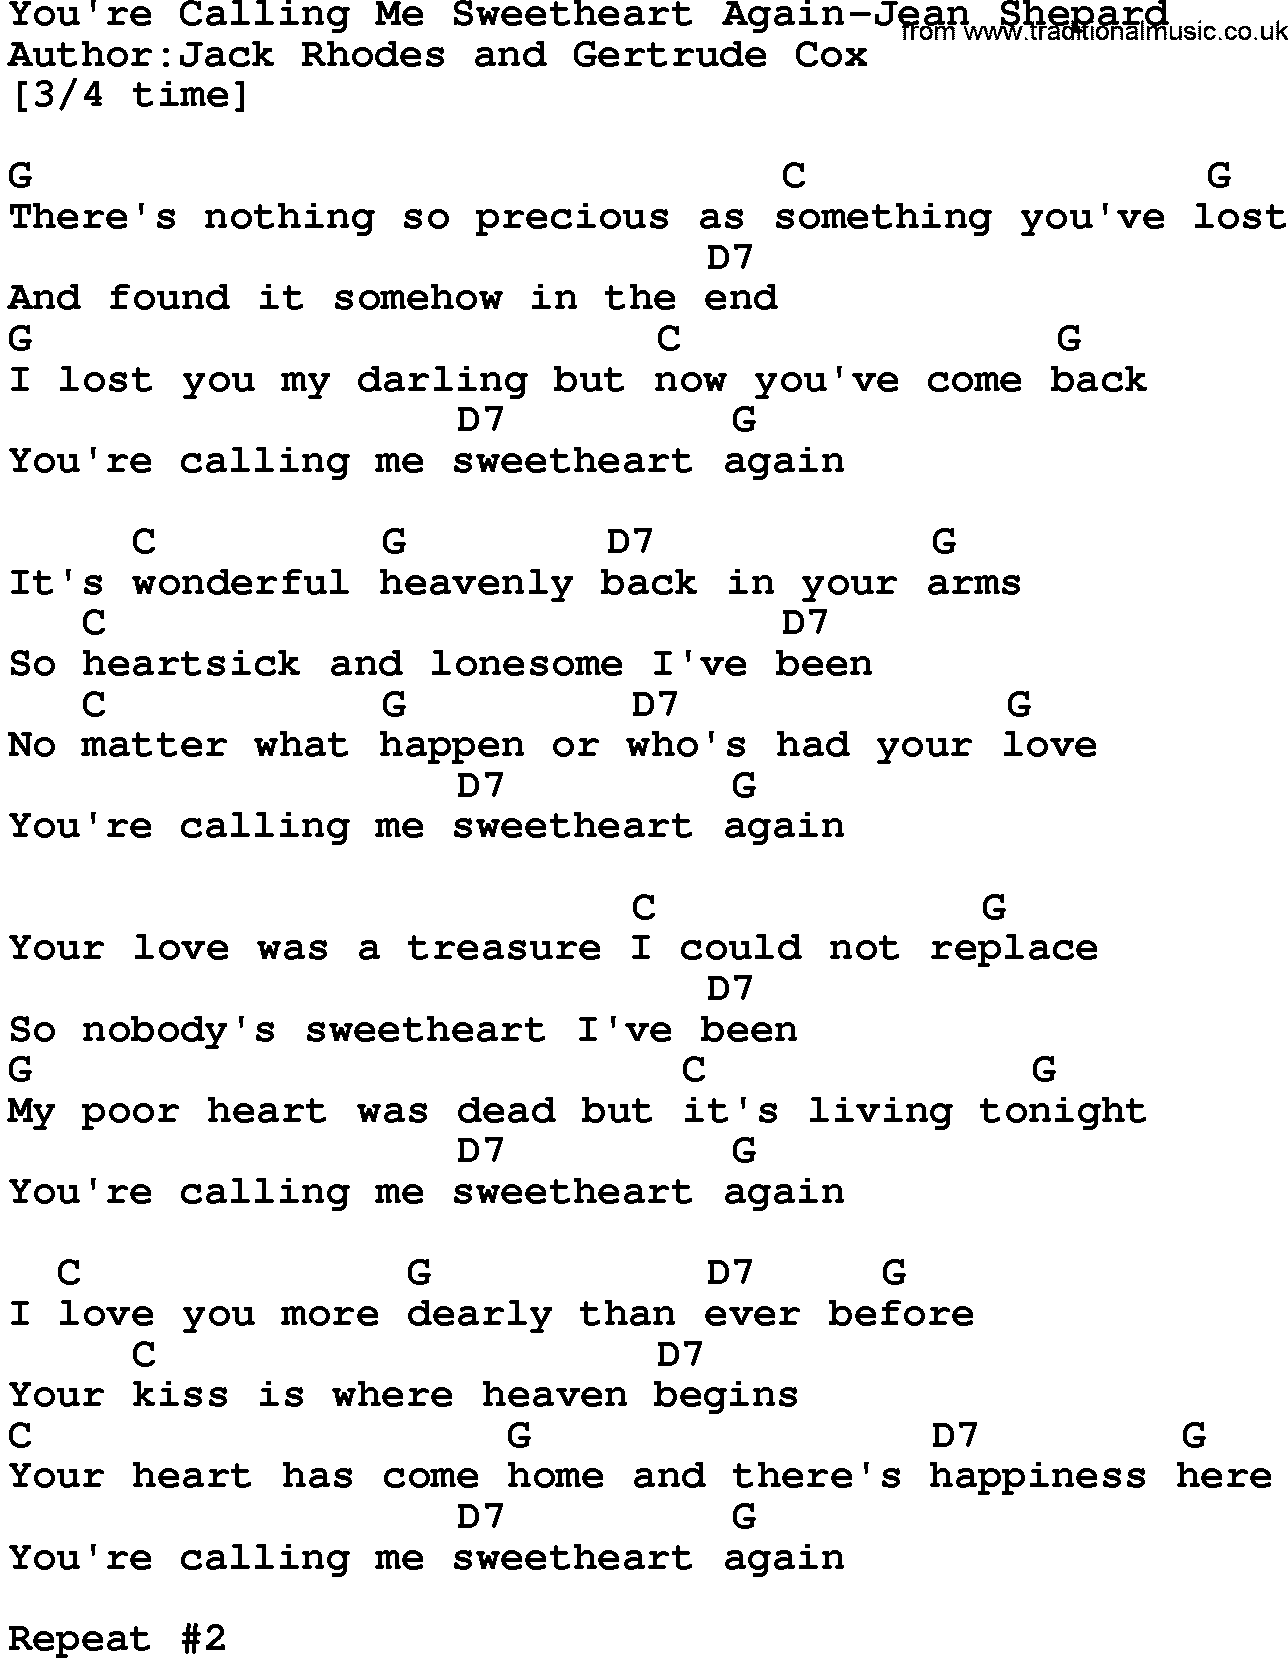 Country music song: You're Calling Me Sweetheart Again-Jean Shepard lyrics and chords